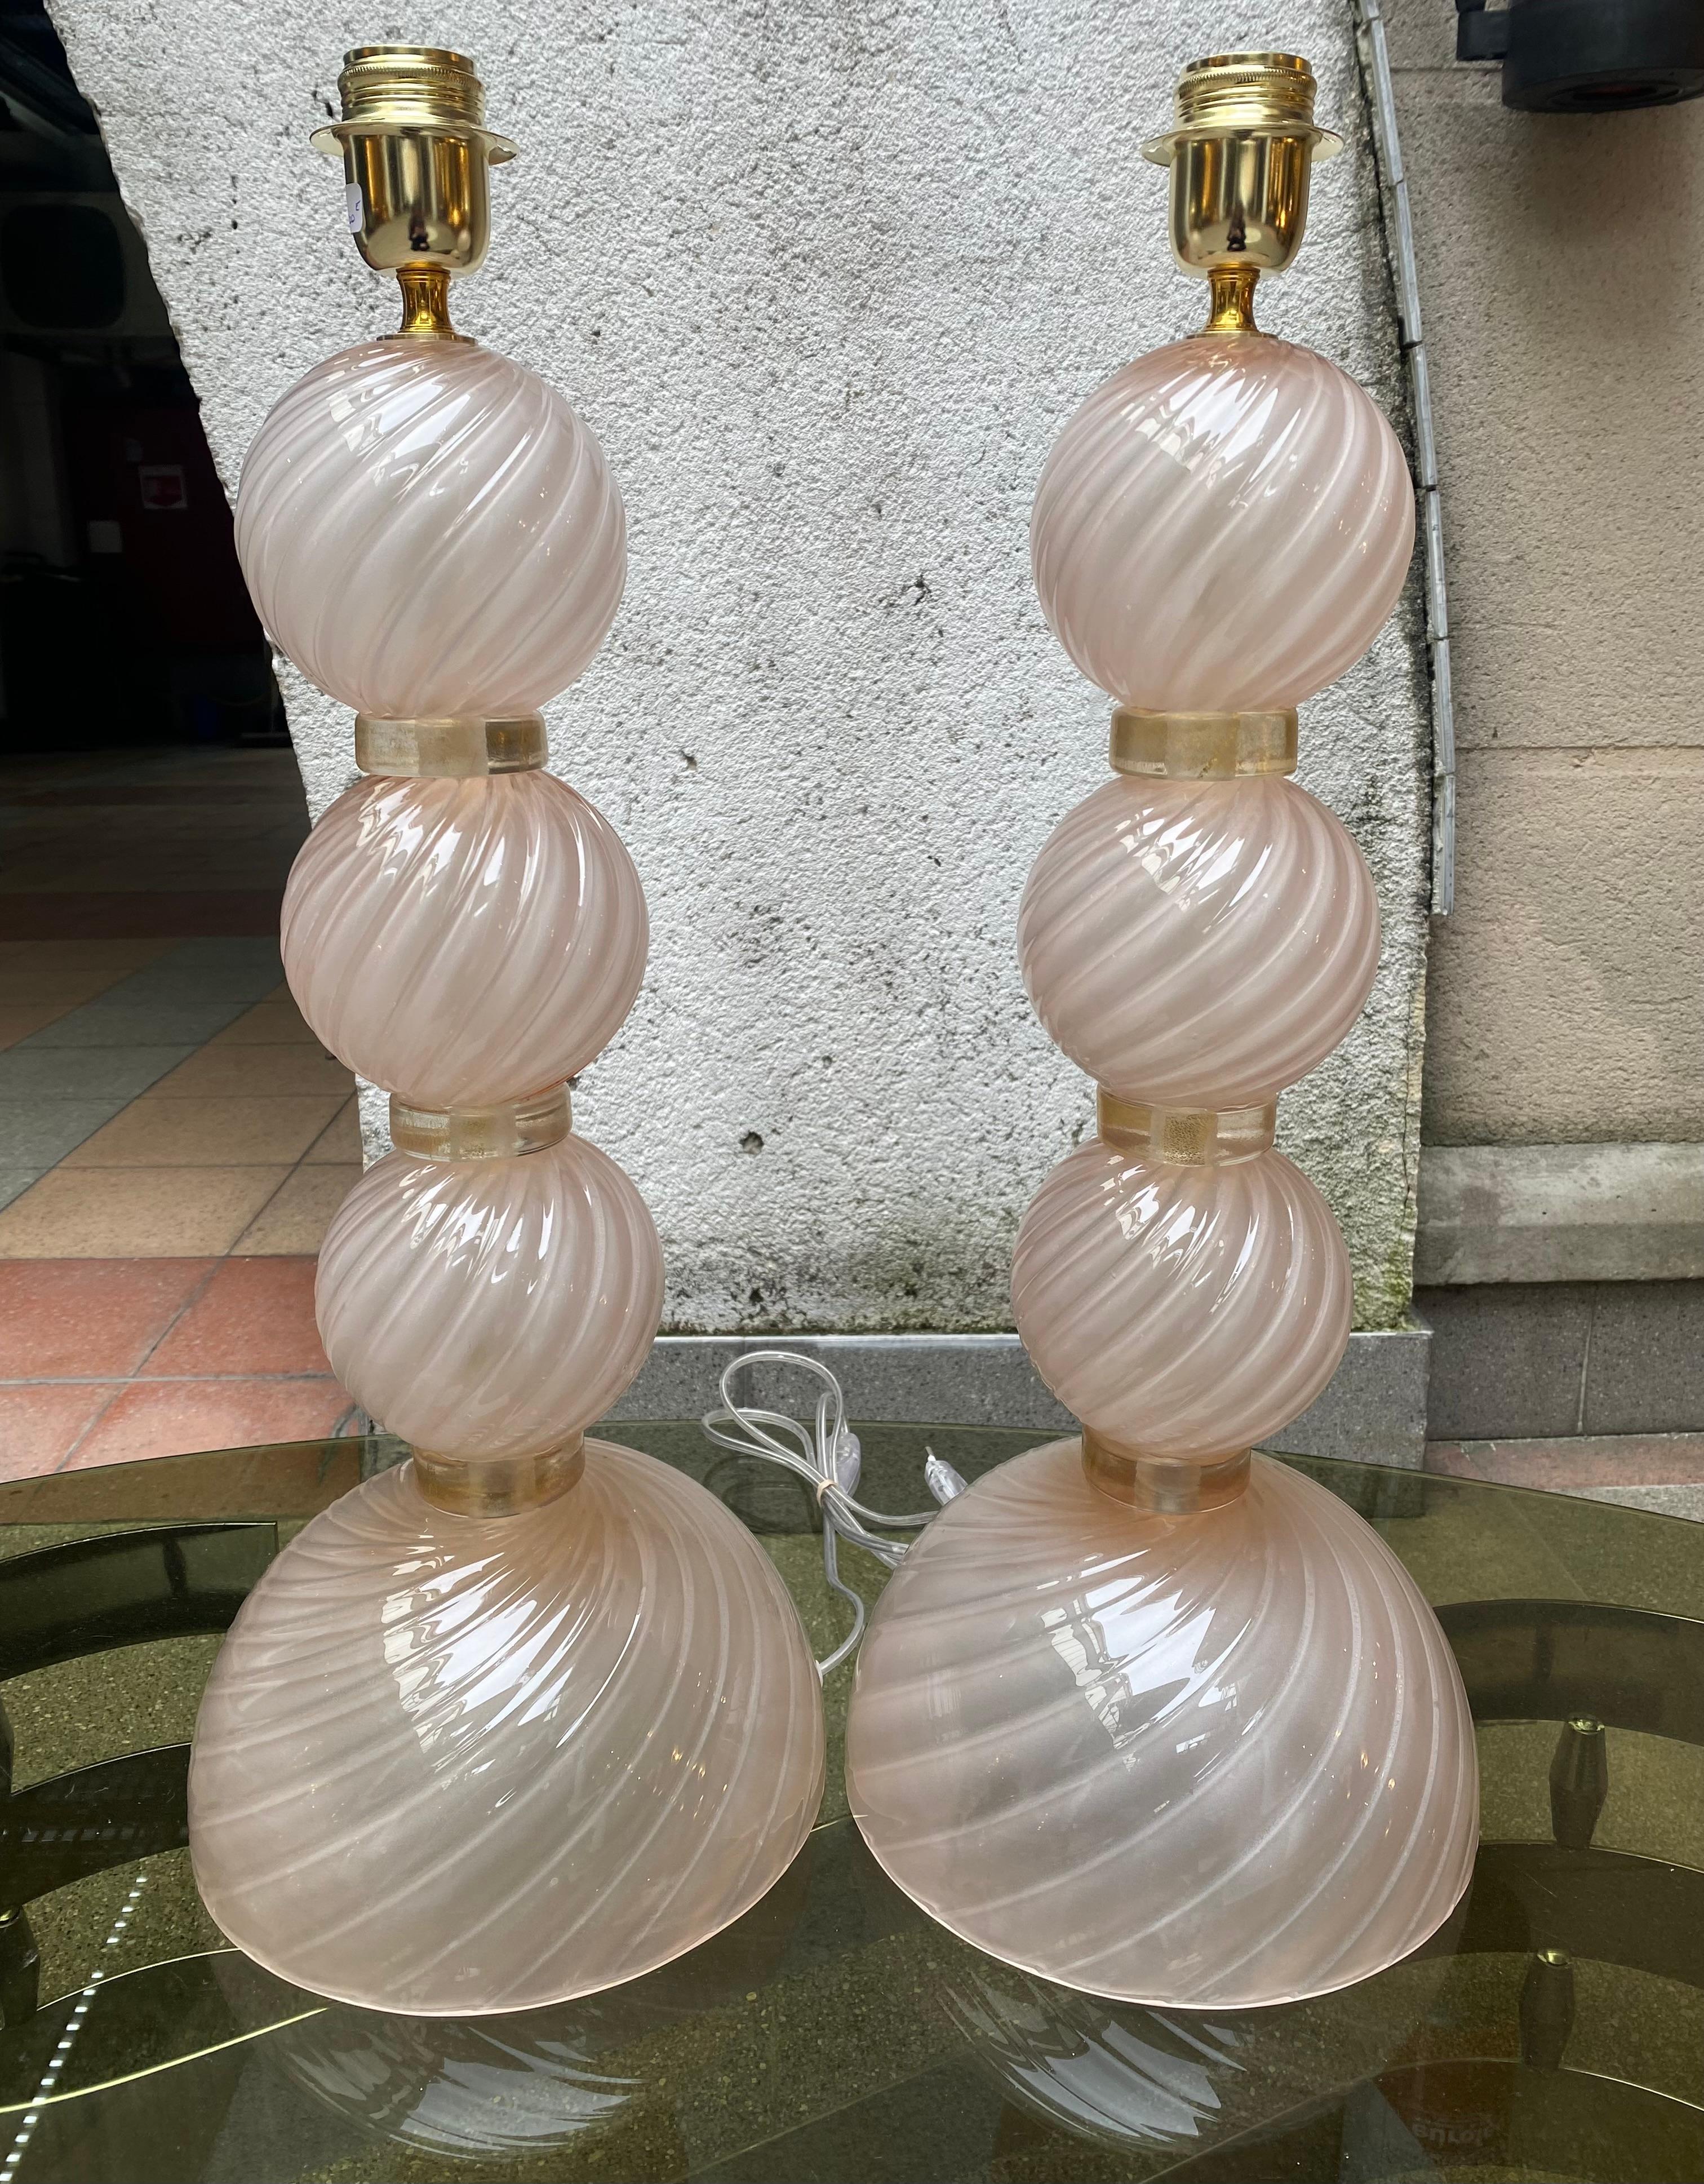 Pair of pink lamps 
Murano glass 
Dimensions : h60xl25cm
Ref : c/1938/2
Price : 3200€ for the pair.